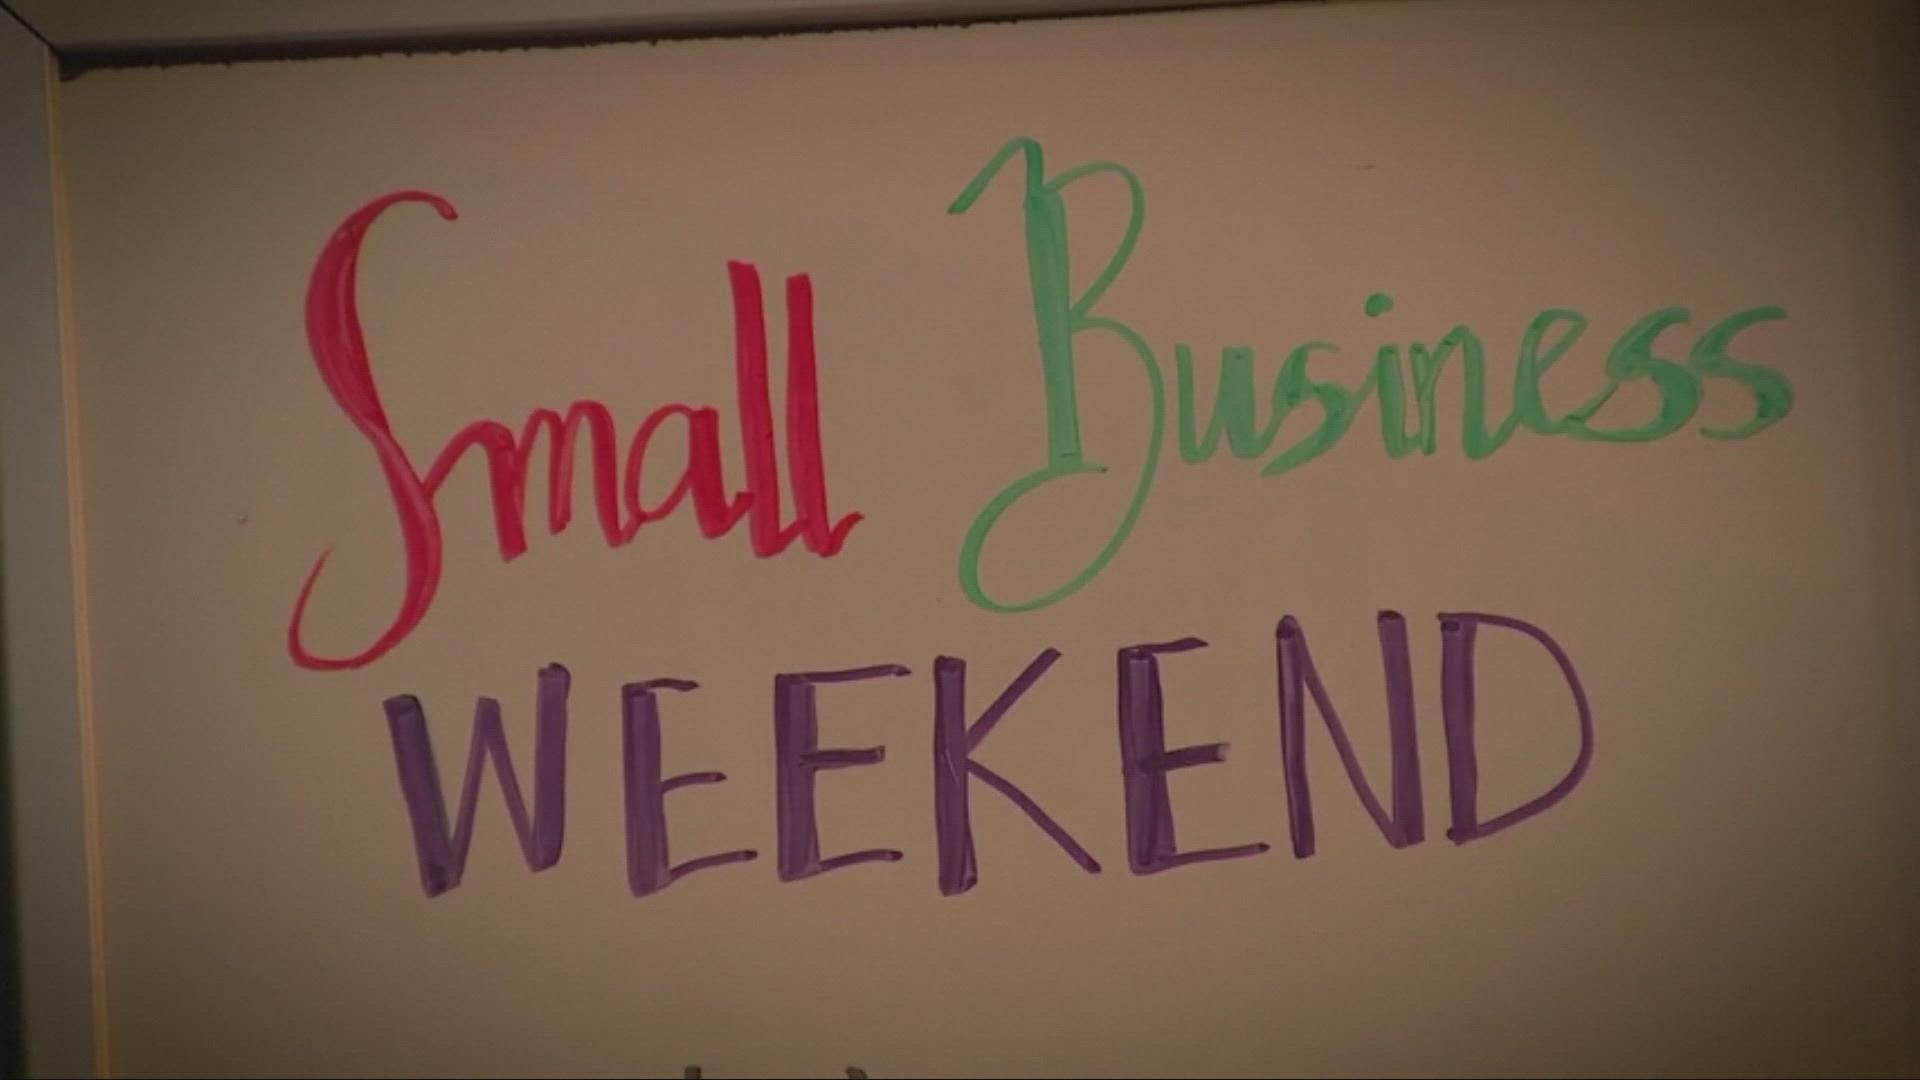 Today kicks off Small Business Saturday and the district director of U.S. small business administration- Frances Padilla talks about why it's important to shop small